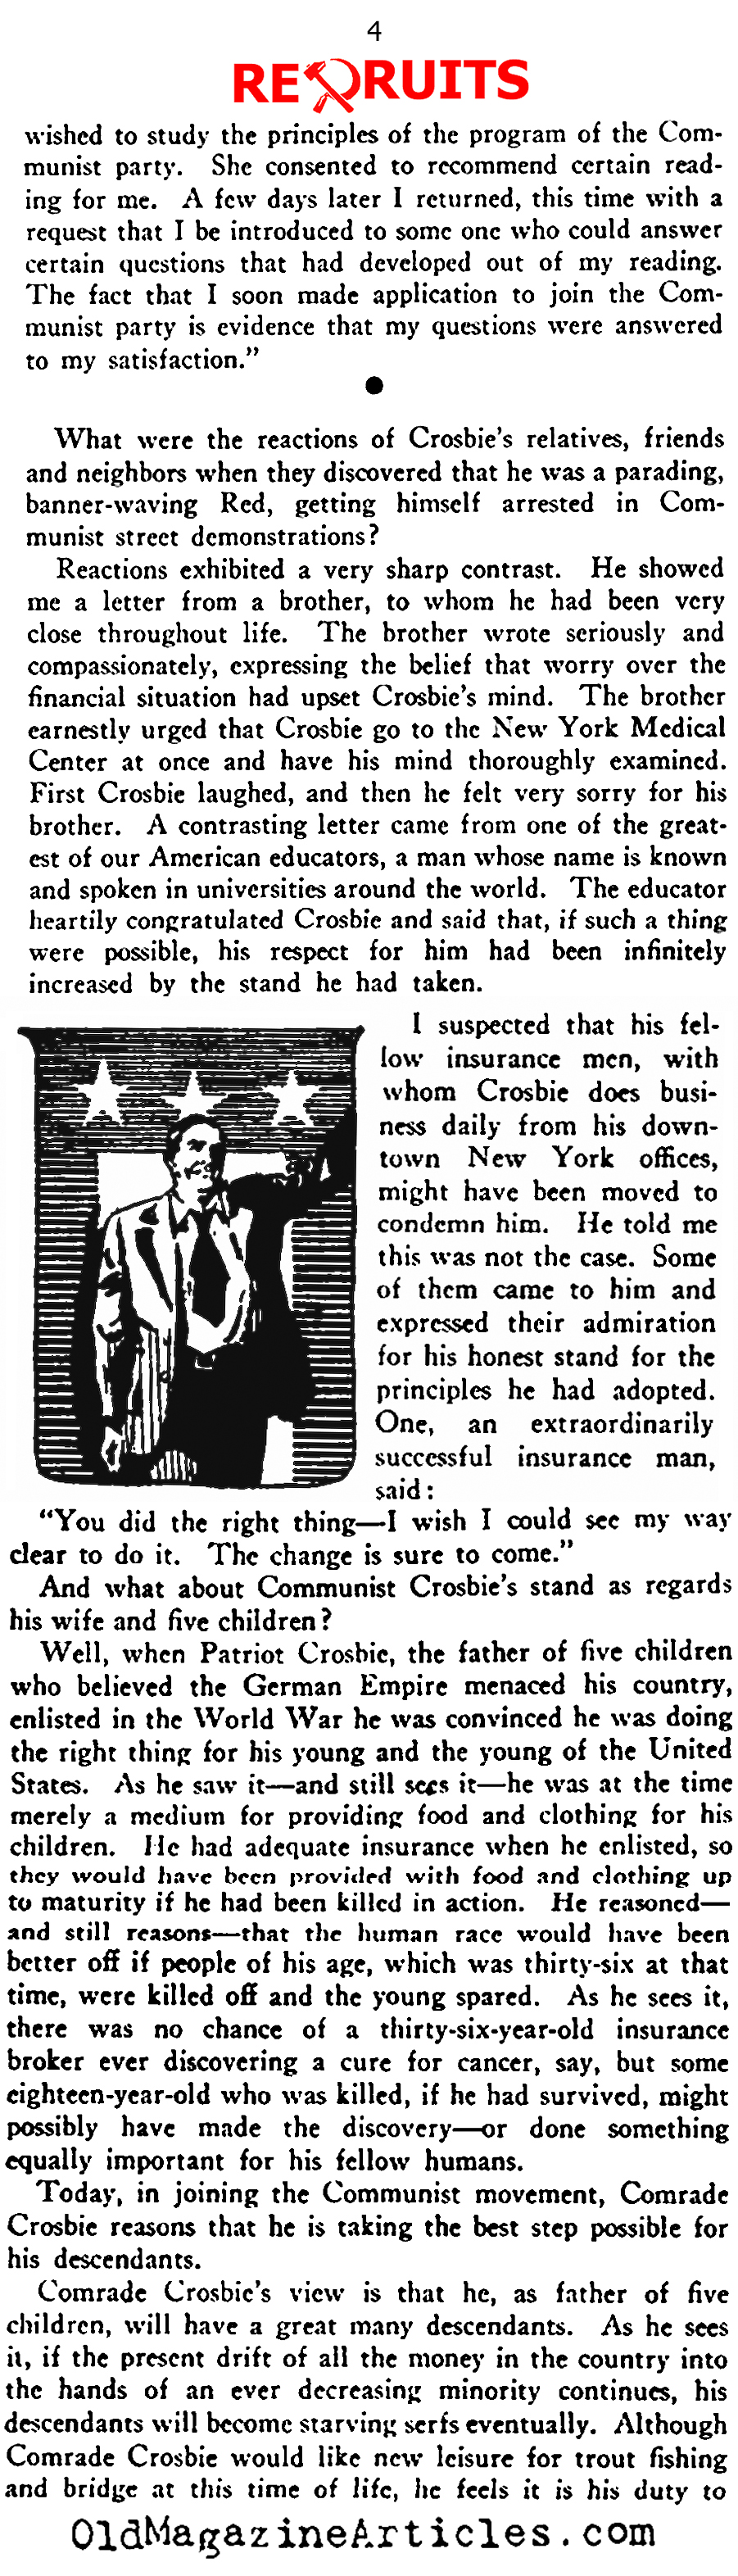 Unlikely Communists & Red Teachers (New Outlook Magazine, 1934)